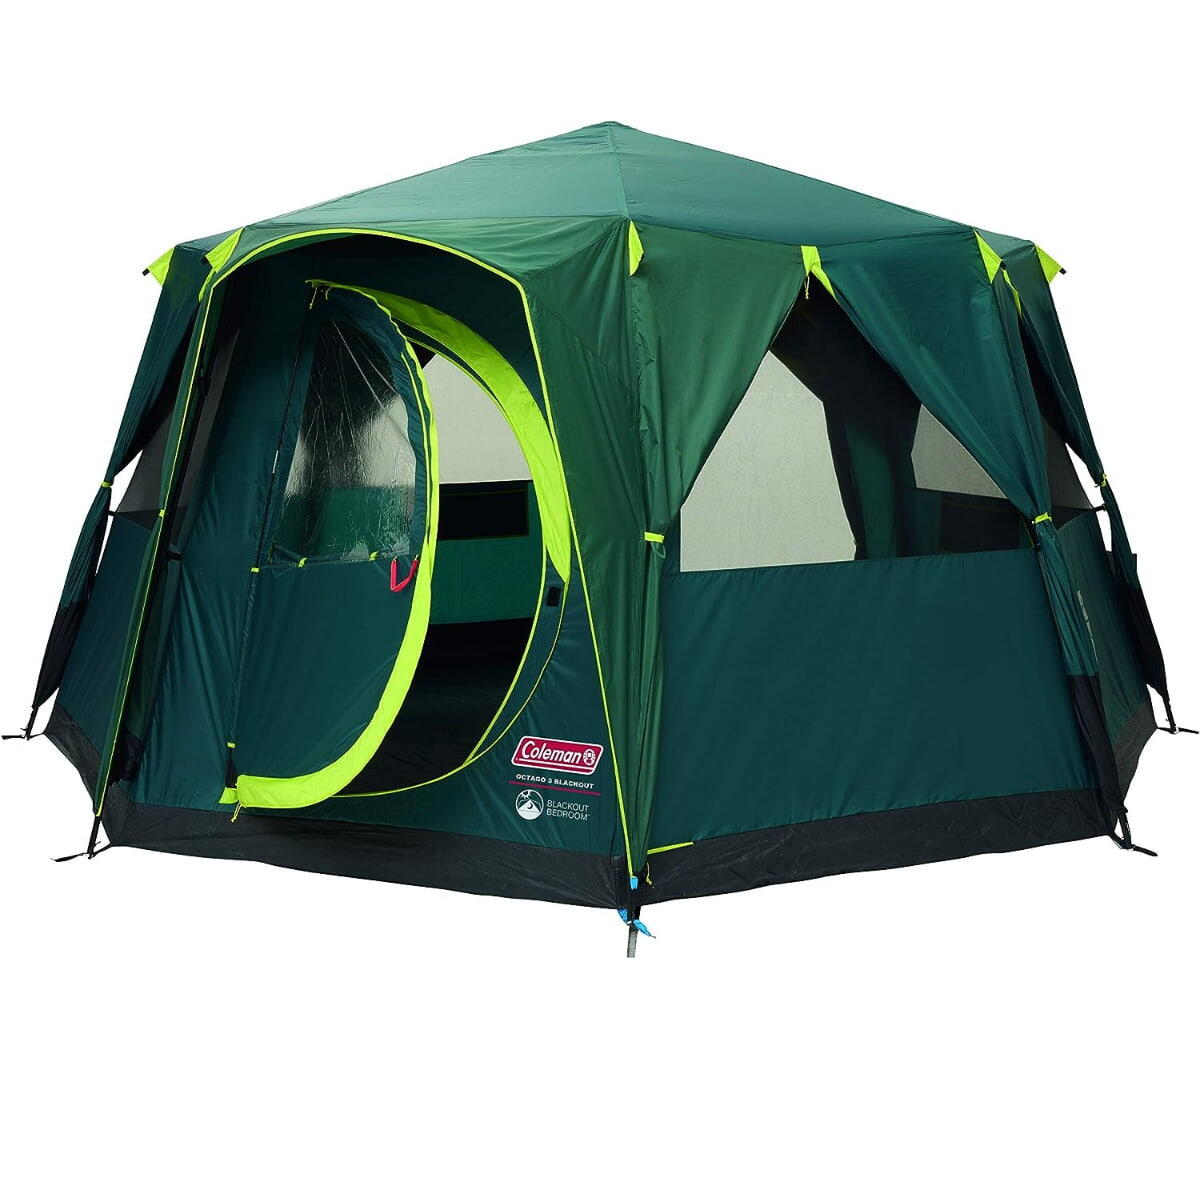 Coleman OctaGon 8-Person Glamping Tent with Sewn-in Groundsheet 1/7